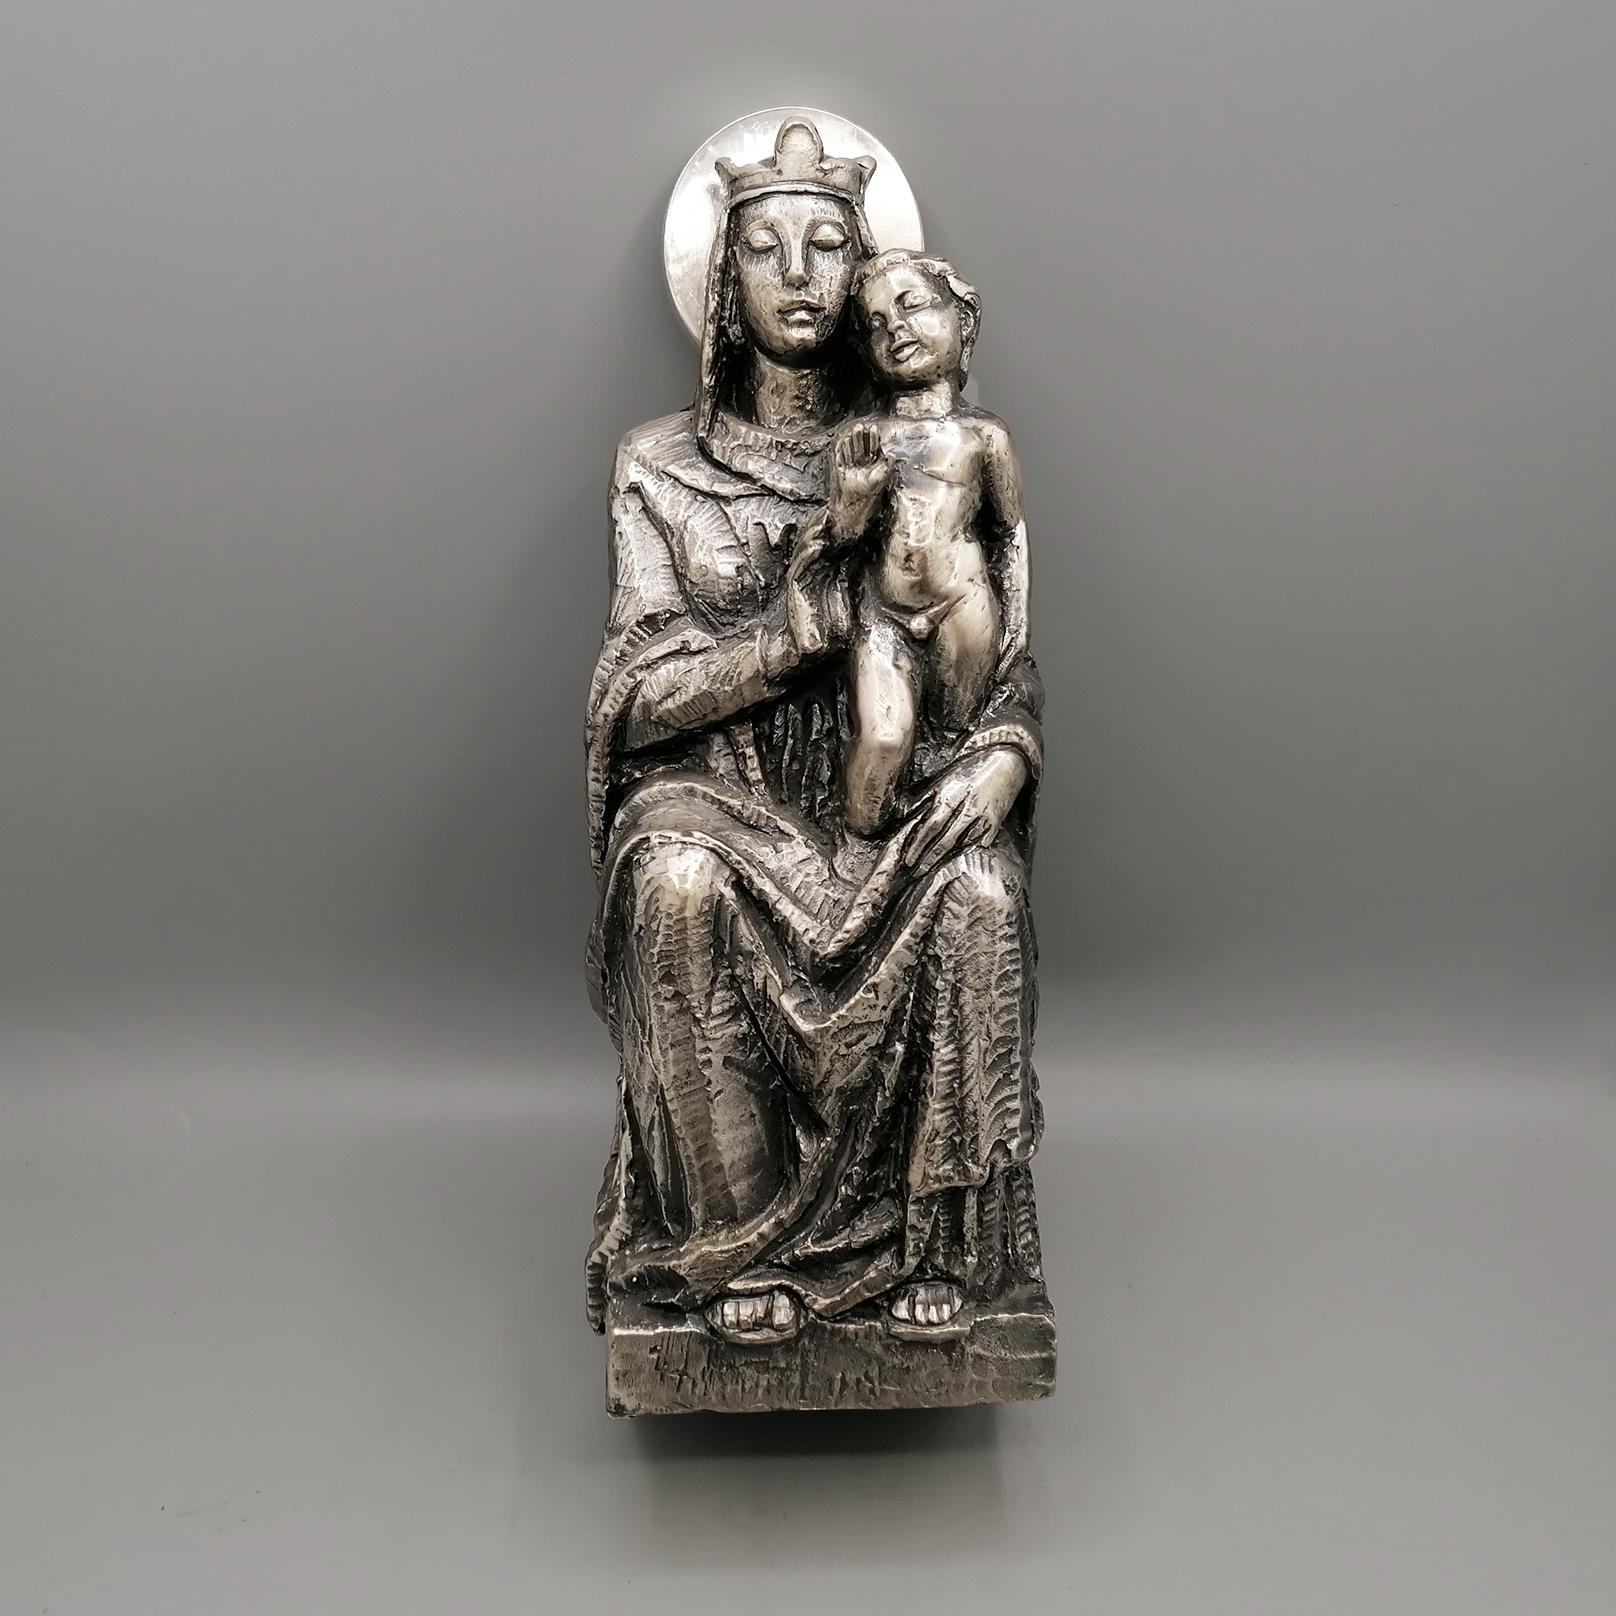 Hanging statue depicting the Madonna and Child blessing, seated on the throne.
It was made with the sand/earth casting technique, finely chiseled and subsequently burnished and treated with antioxidant paint.
Sand/earth casting consists of pouring